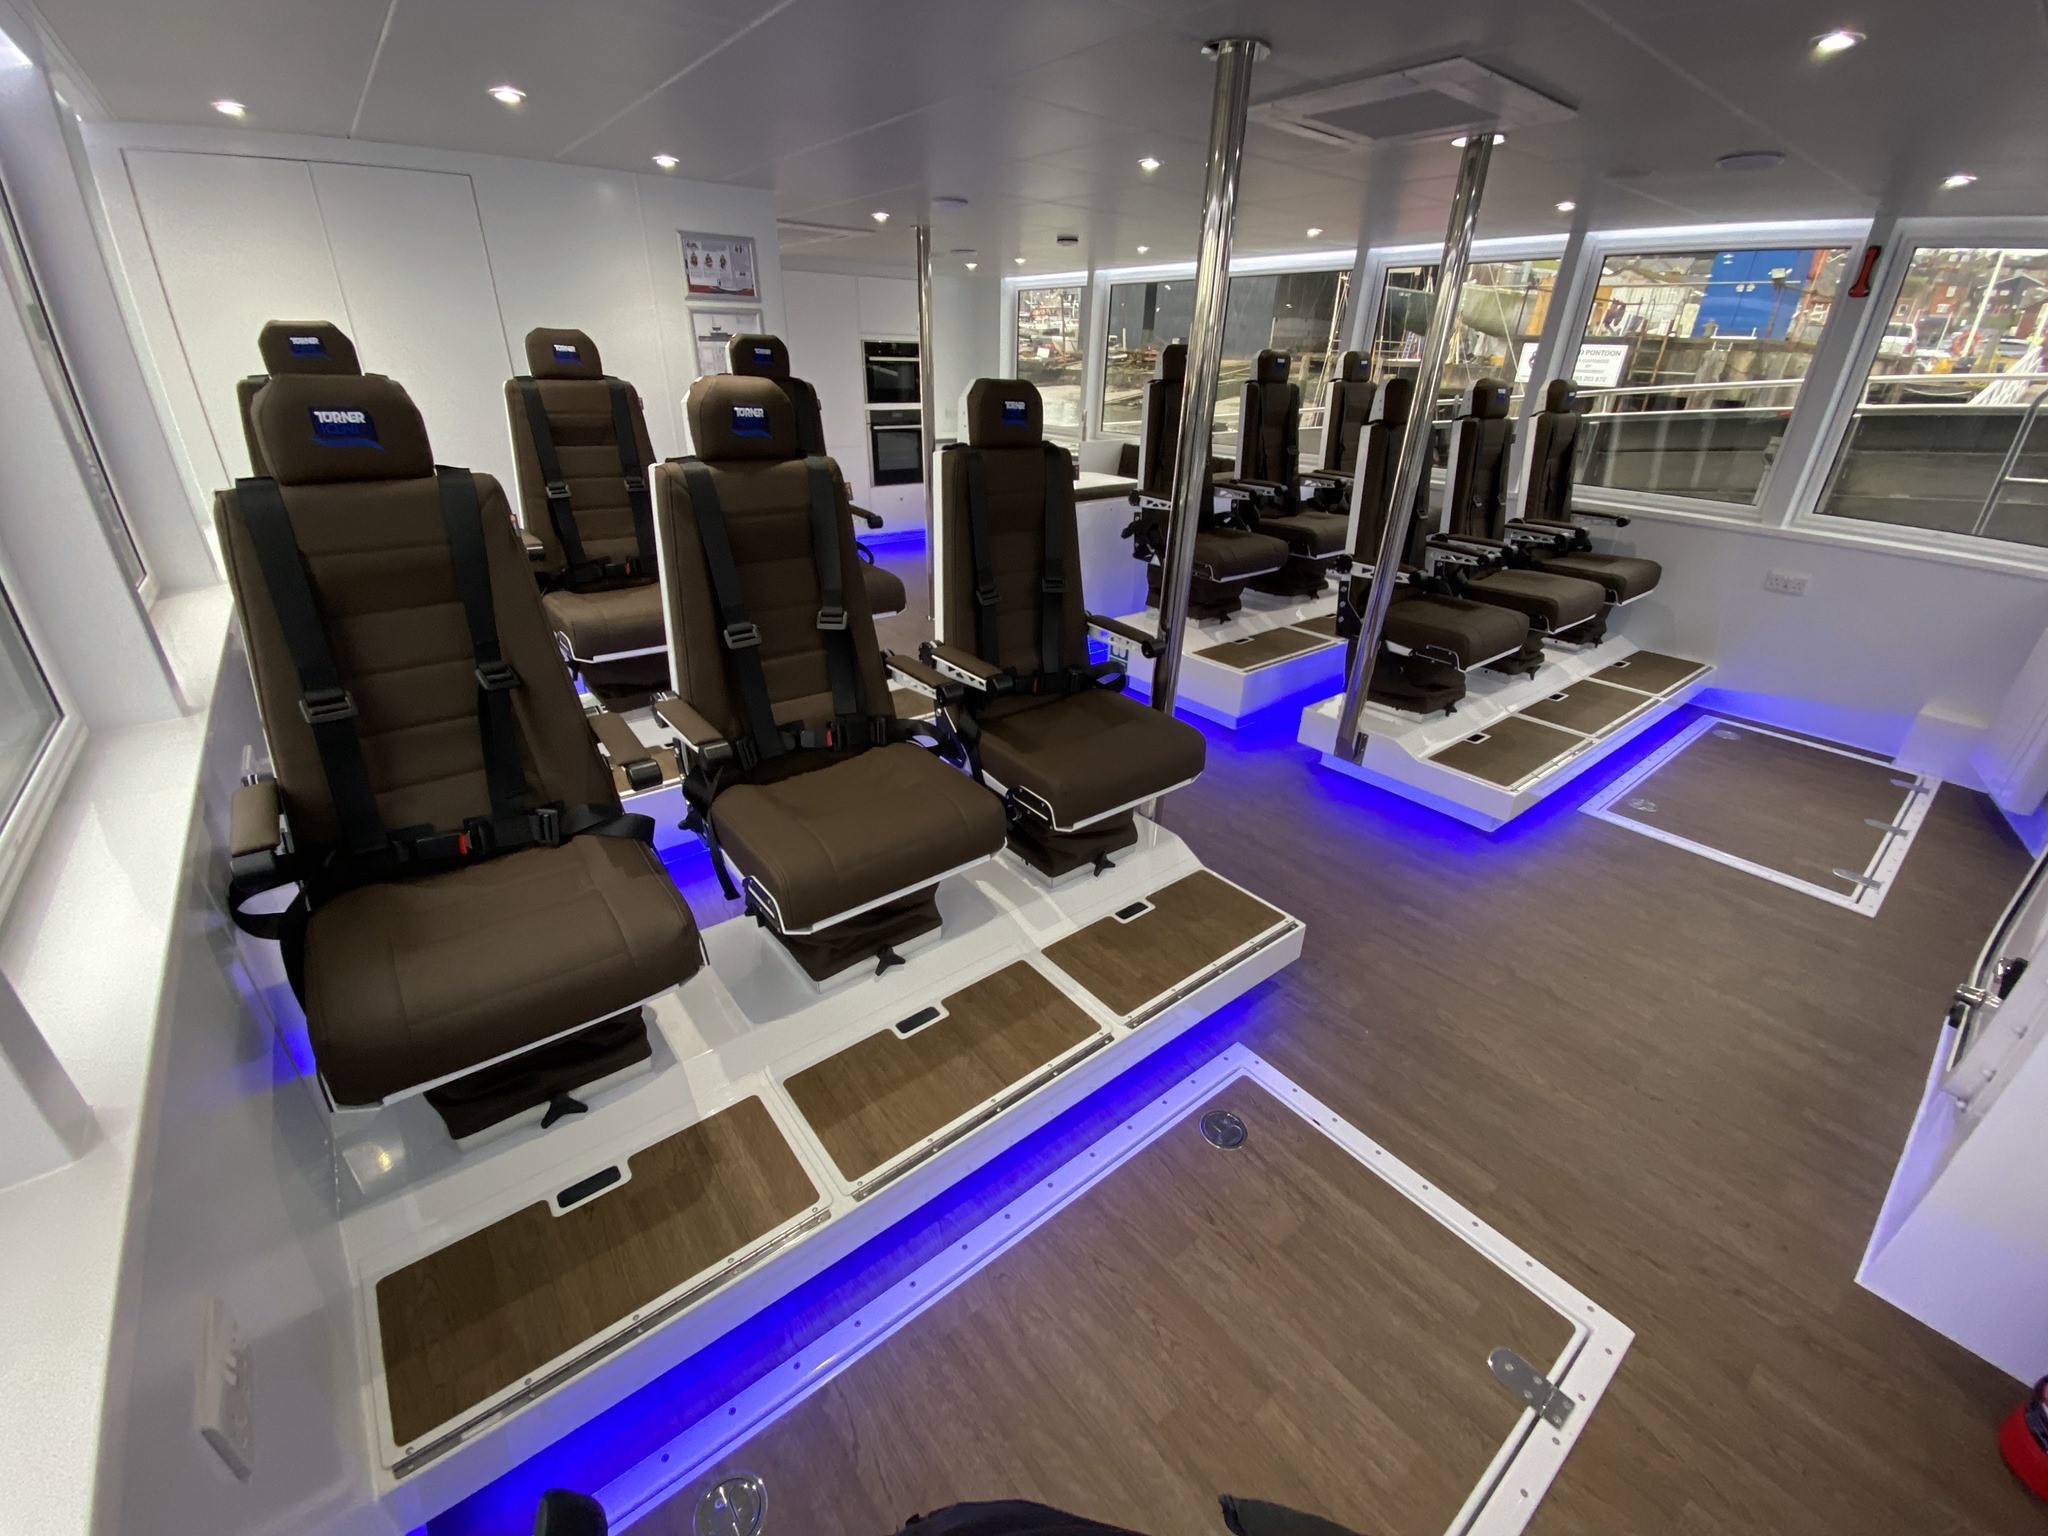 KPM Marine crew seating: Safety, comfort and convenience